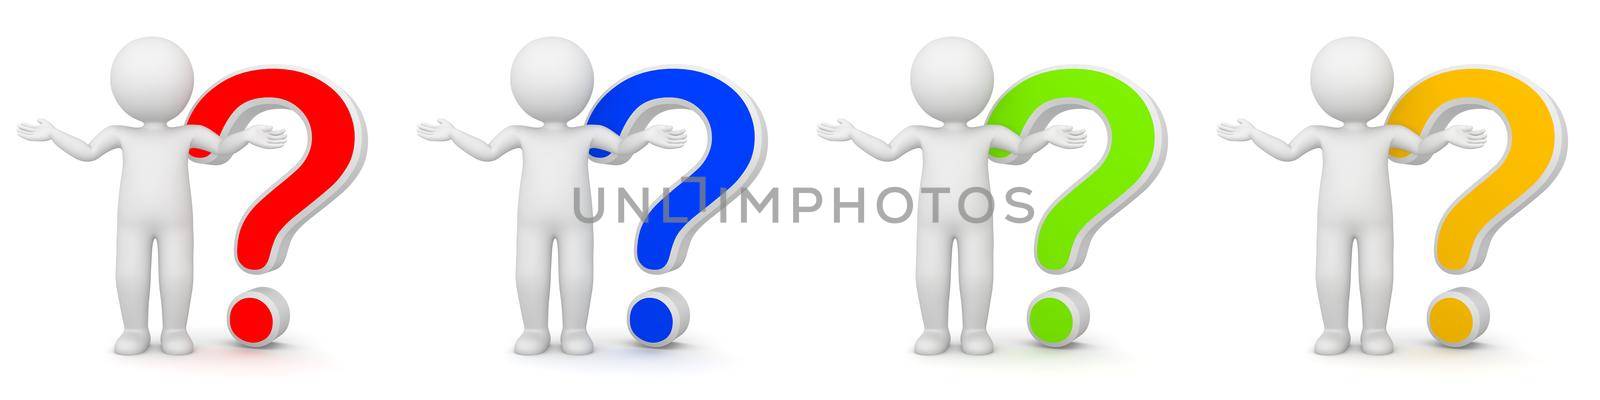 3D Rendering of man with question mark - different colors